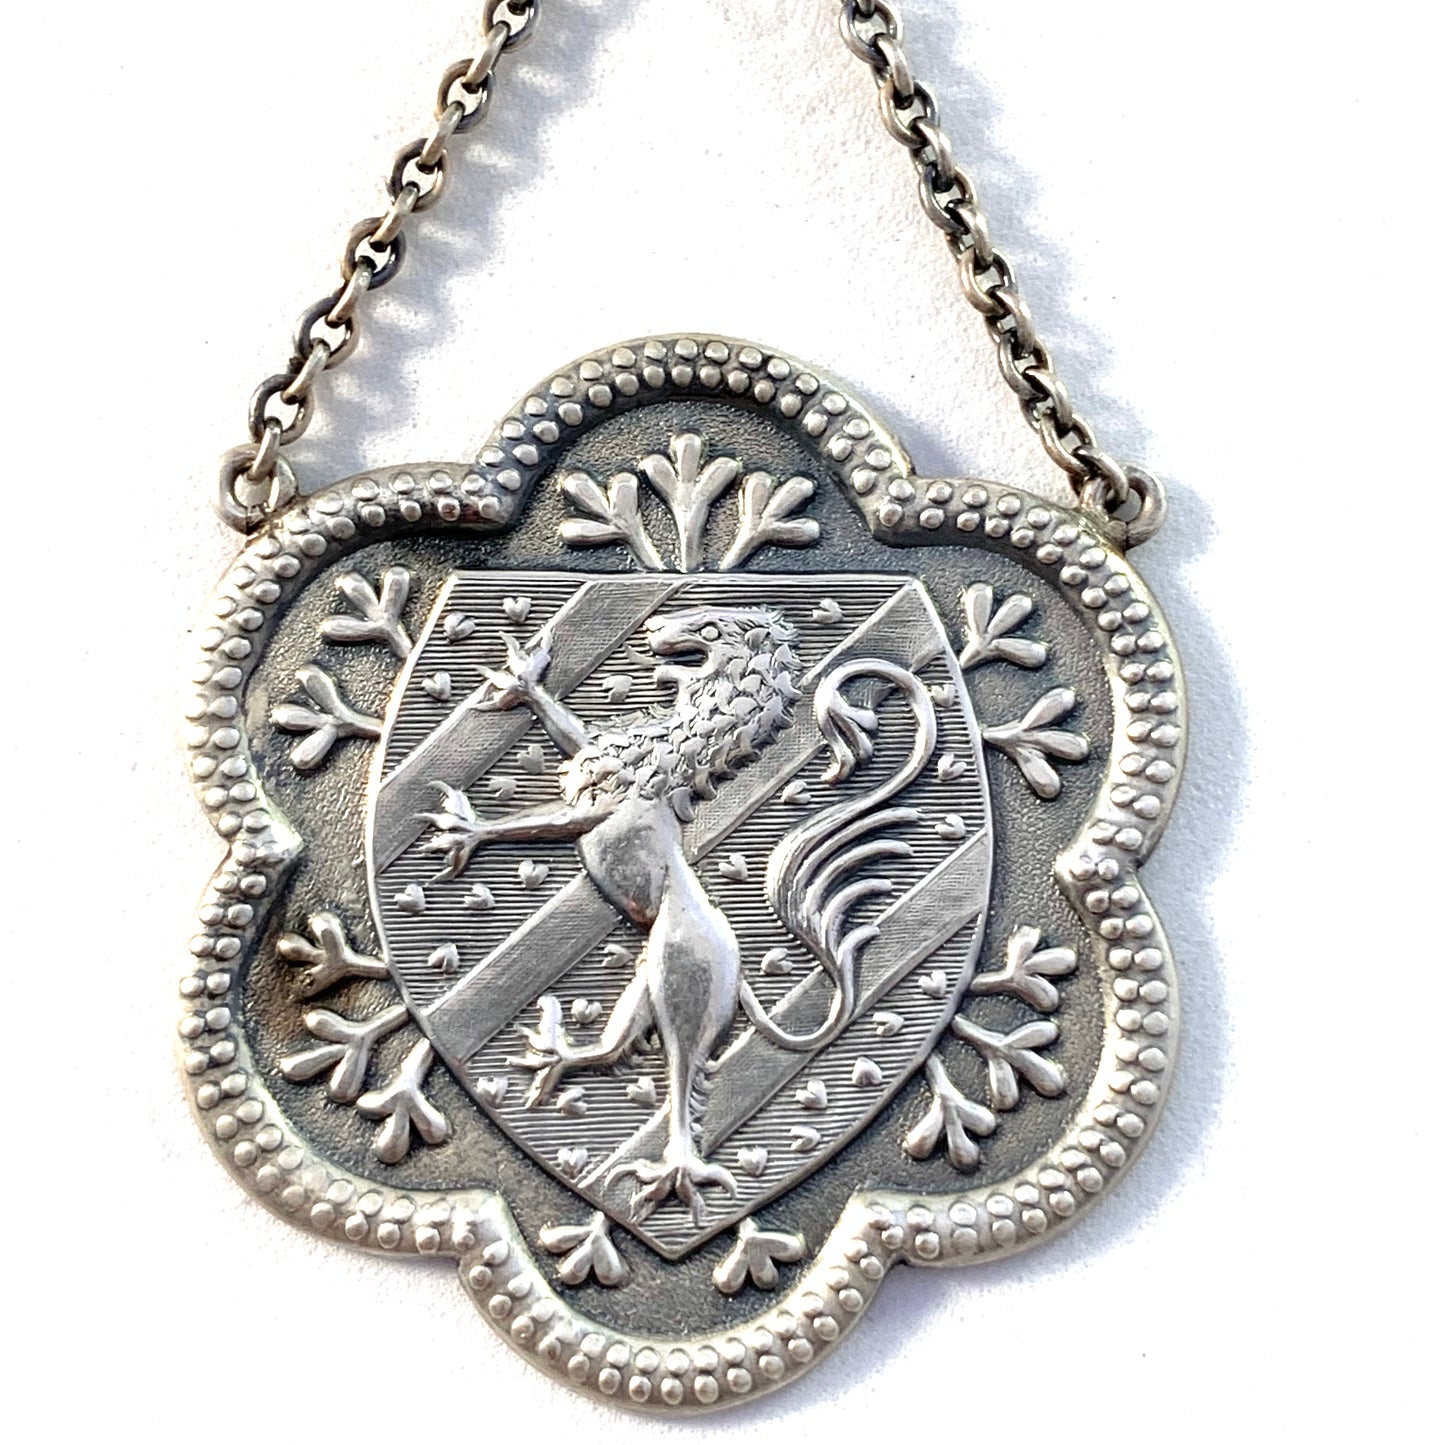 A Rylen, Sweden year 1950 Mid Century Sterling Silver Griffin Pendant Unisex Necklace